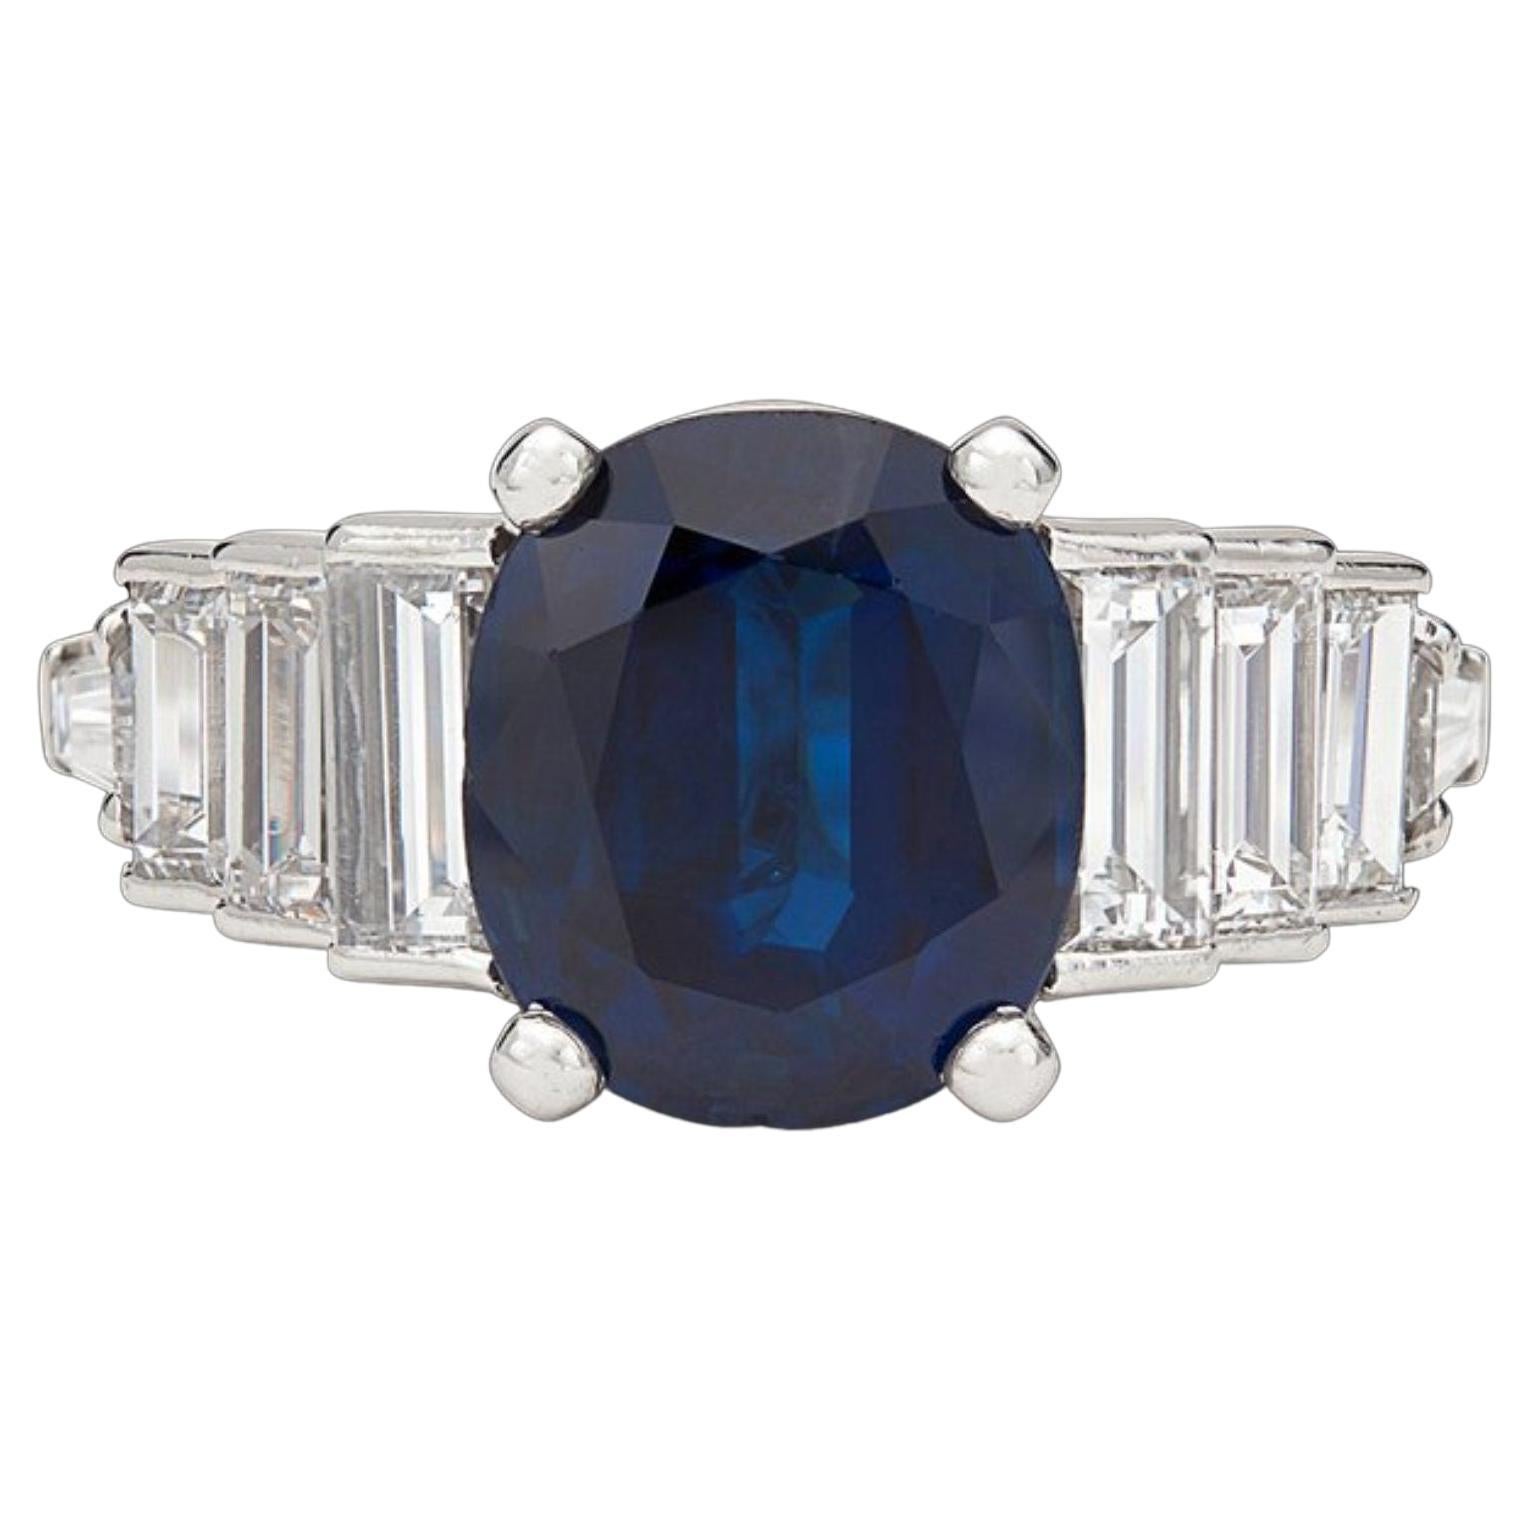 For Sale:  Antique 1.5 Carat Ceylon Sapphire and 1 CT Natural Diamond Engagement Band Ring